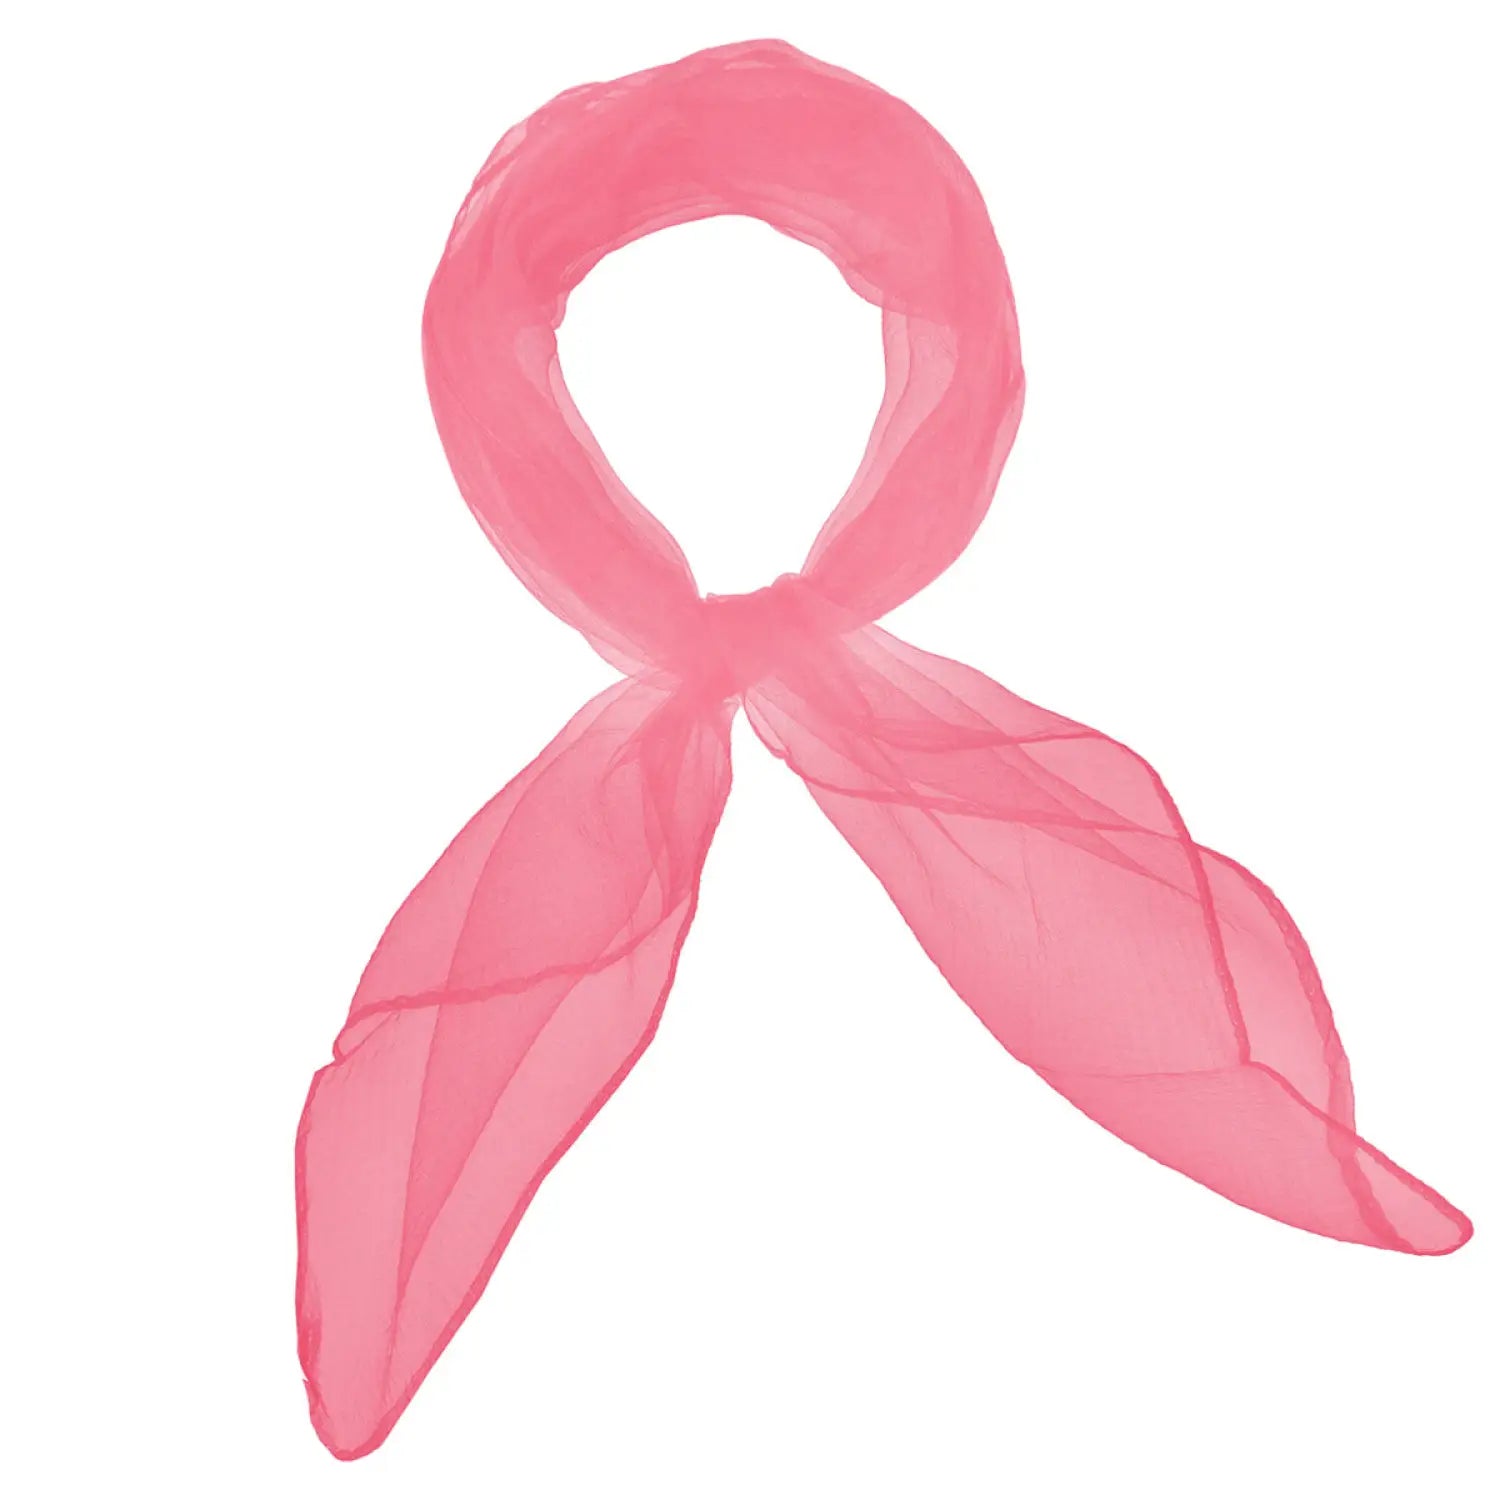 Chiffon square scarf in pink color on white background